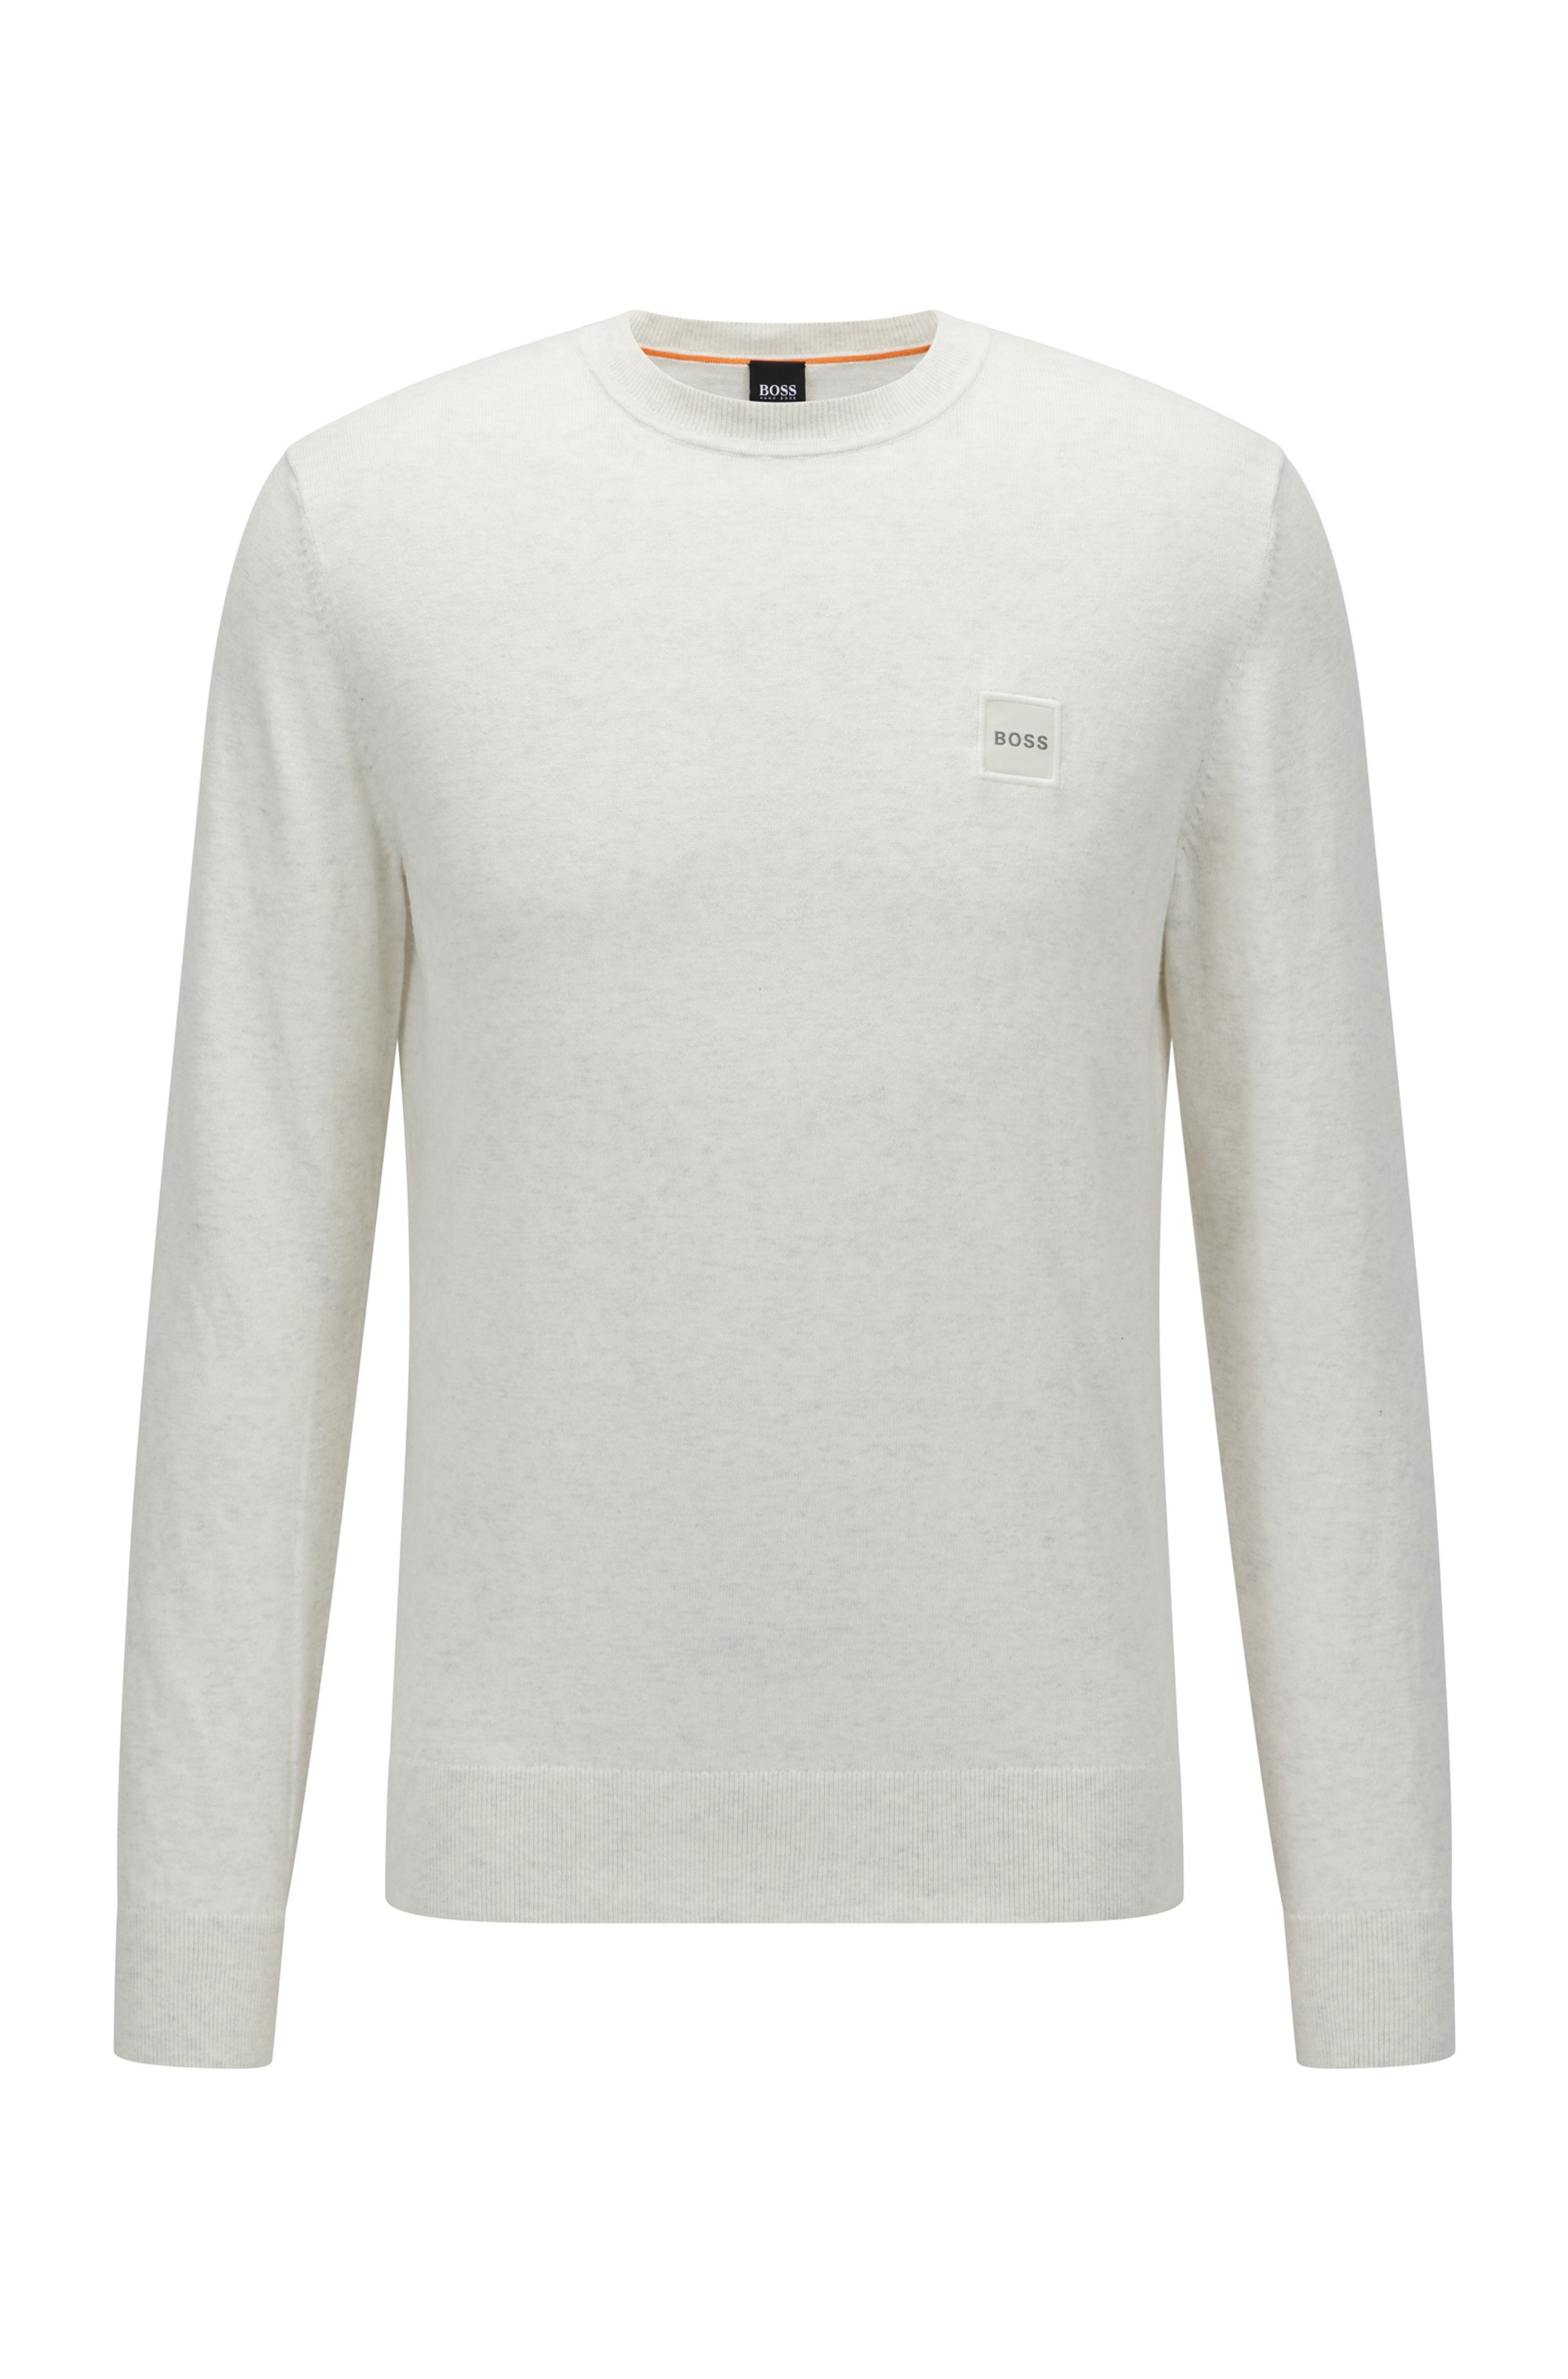 Cotton-cashmere sweater with logo badge, White